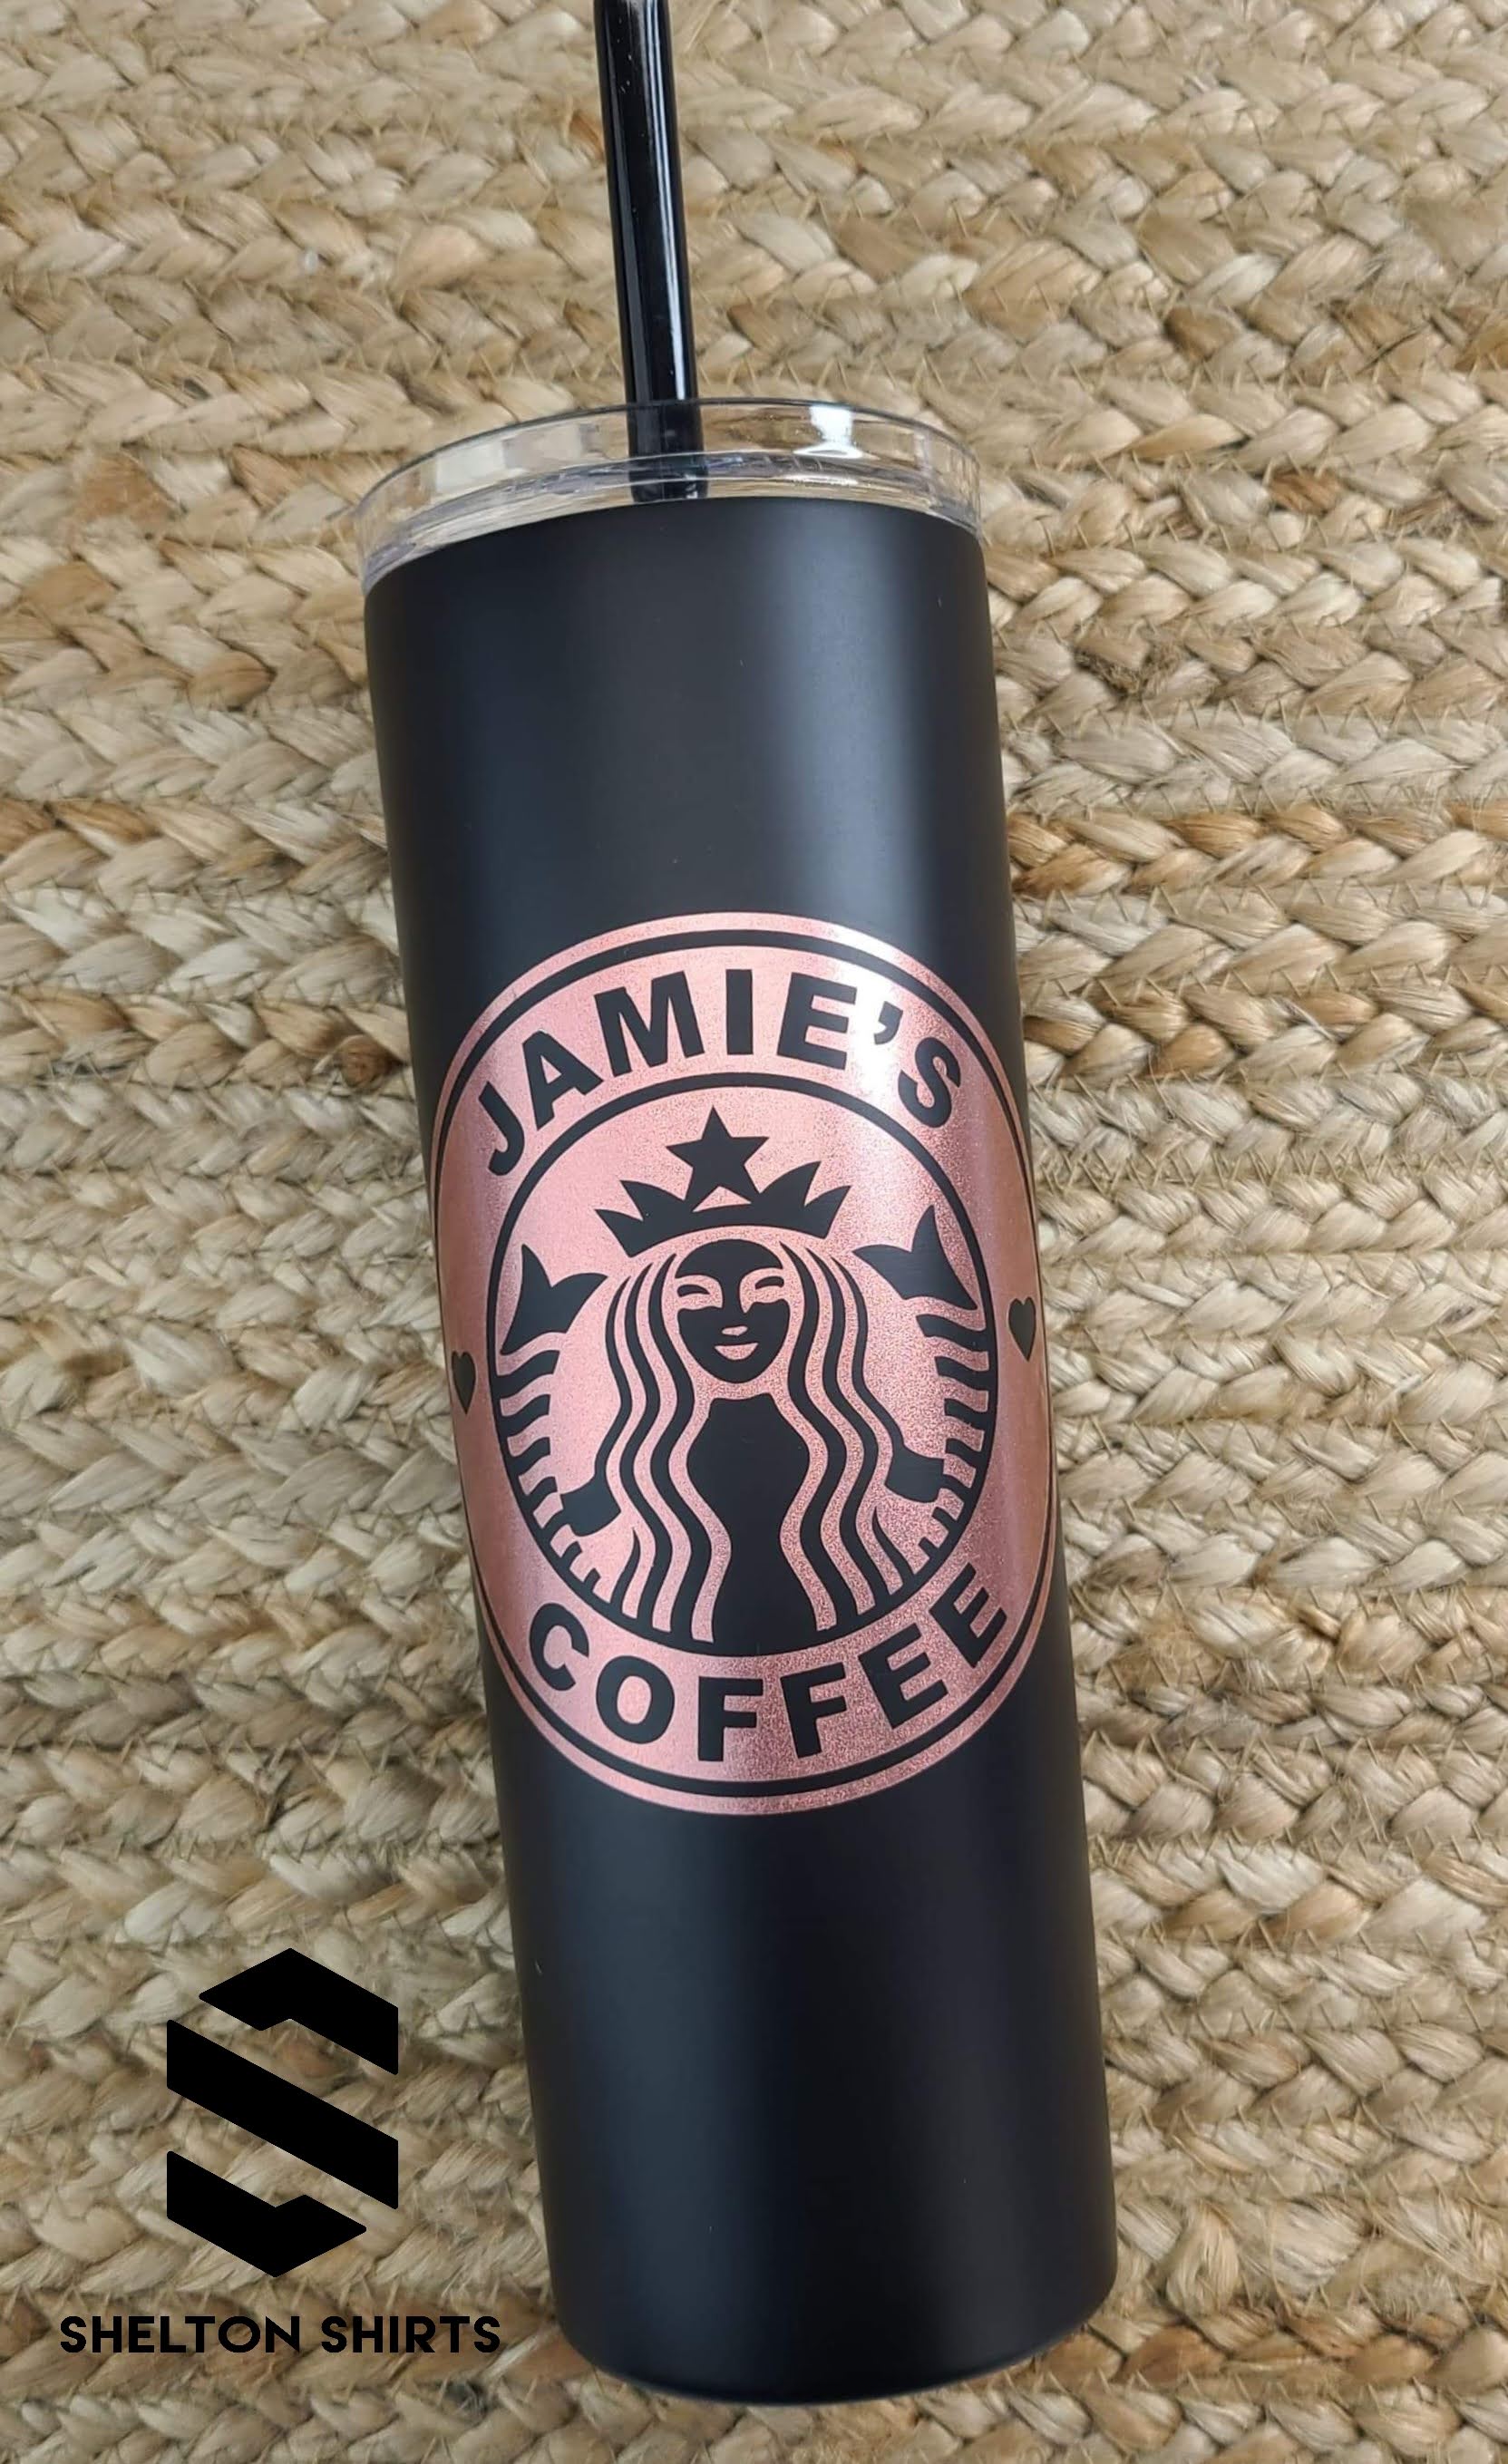 http://candywrapperstore.com/cdn/shop/files/personalized-starbucks-tumbler-sbskinnytumbler-rose-gold-tumbler-with-matte-black-personalized-starbucks-logo-decal-20-oz-double-wall-insulated-tumbler-with-sipper-lid-and-straw-36616.jpg?v=1703803457